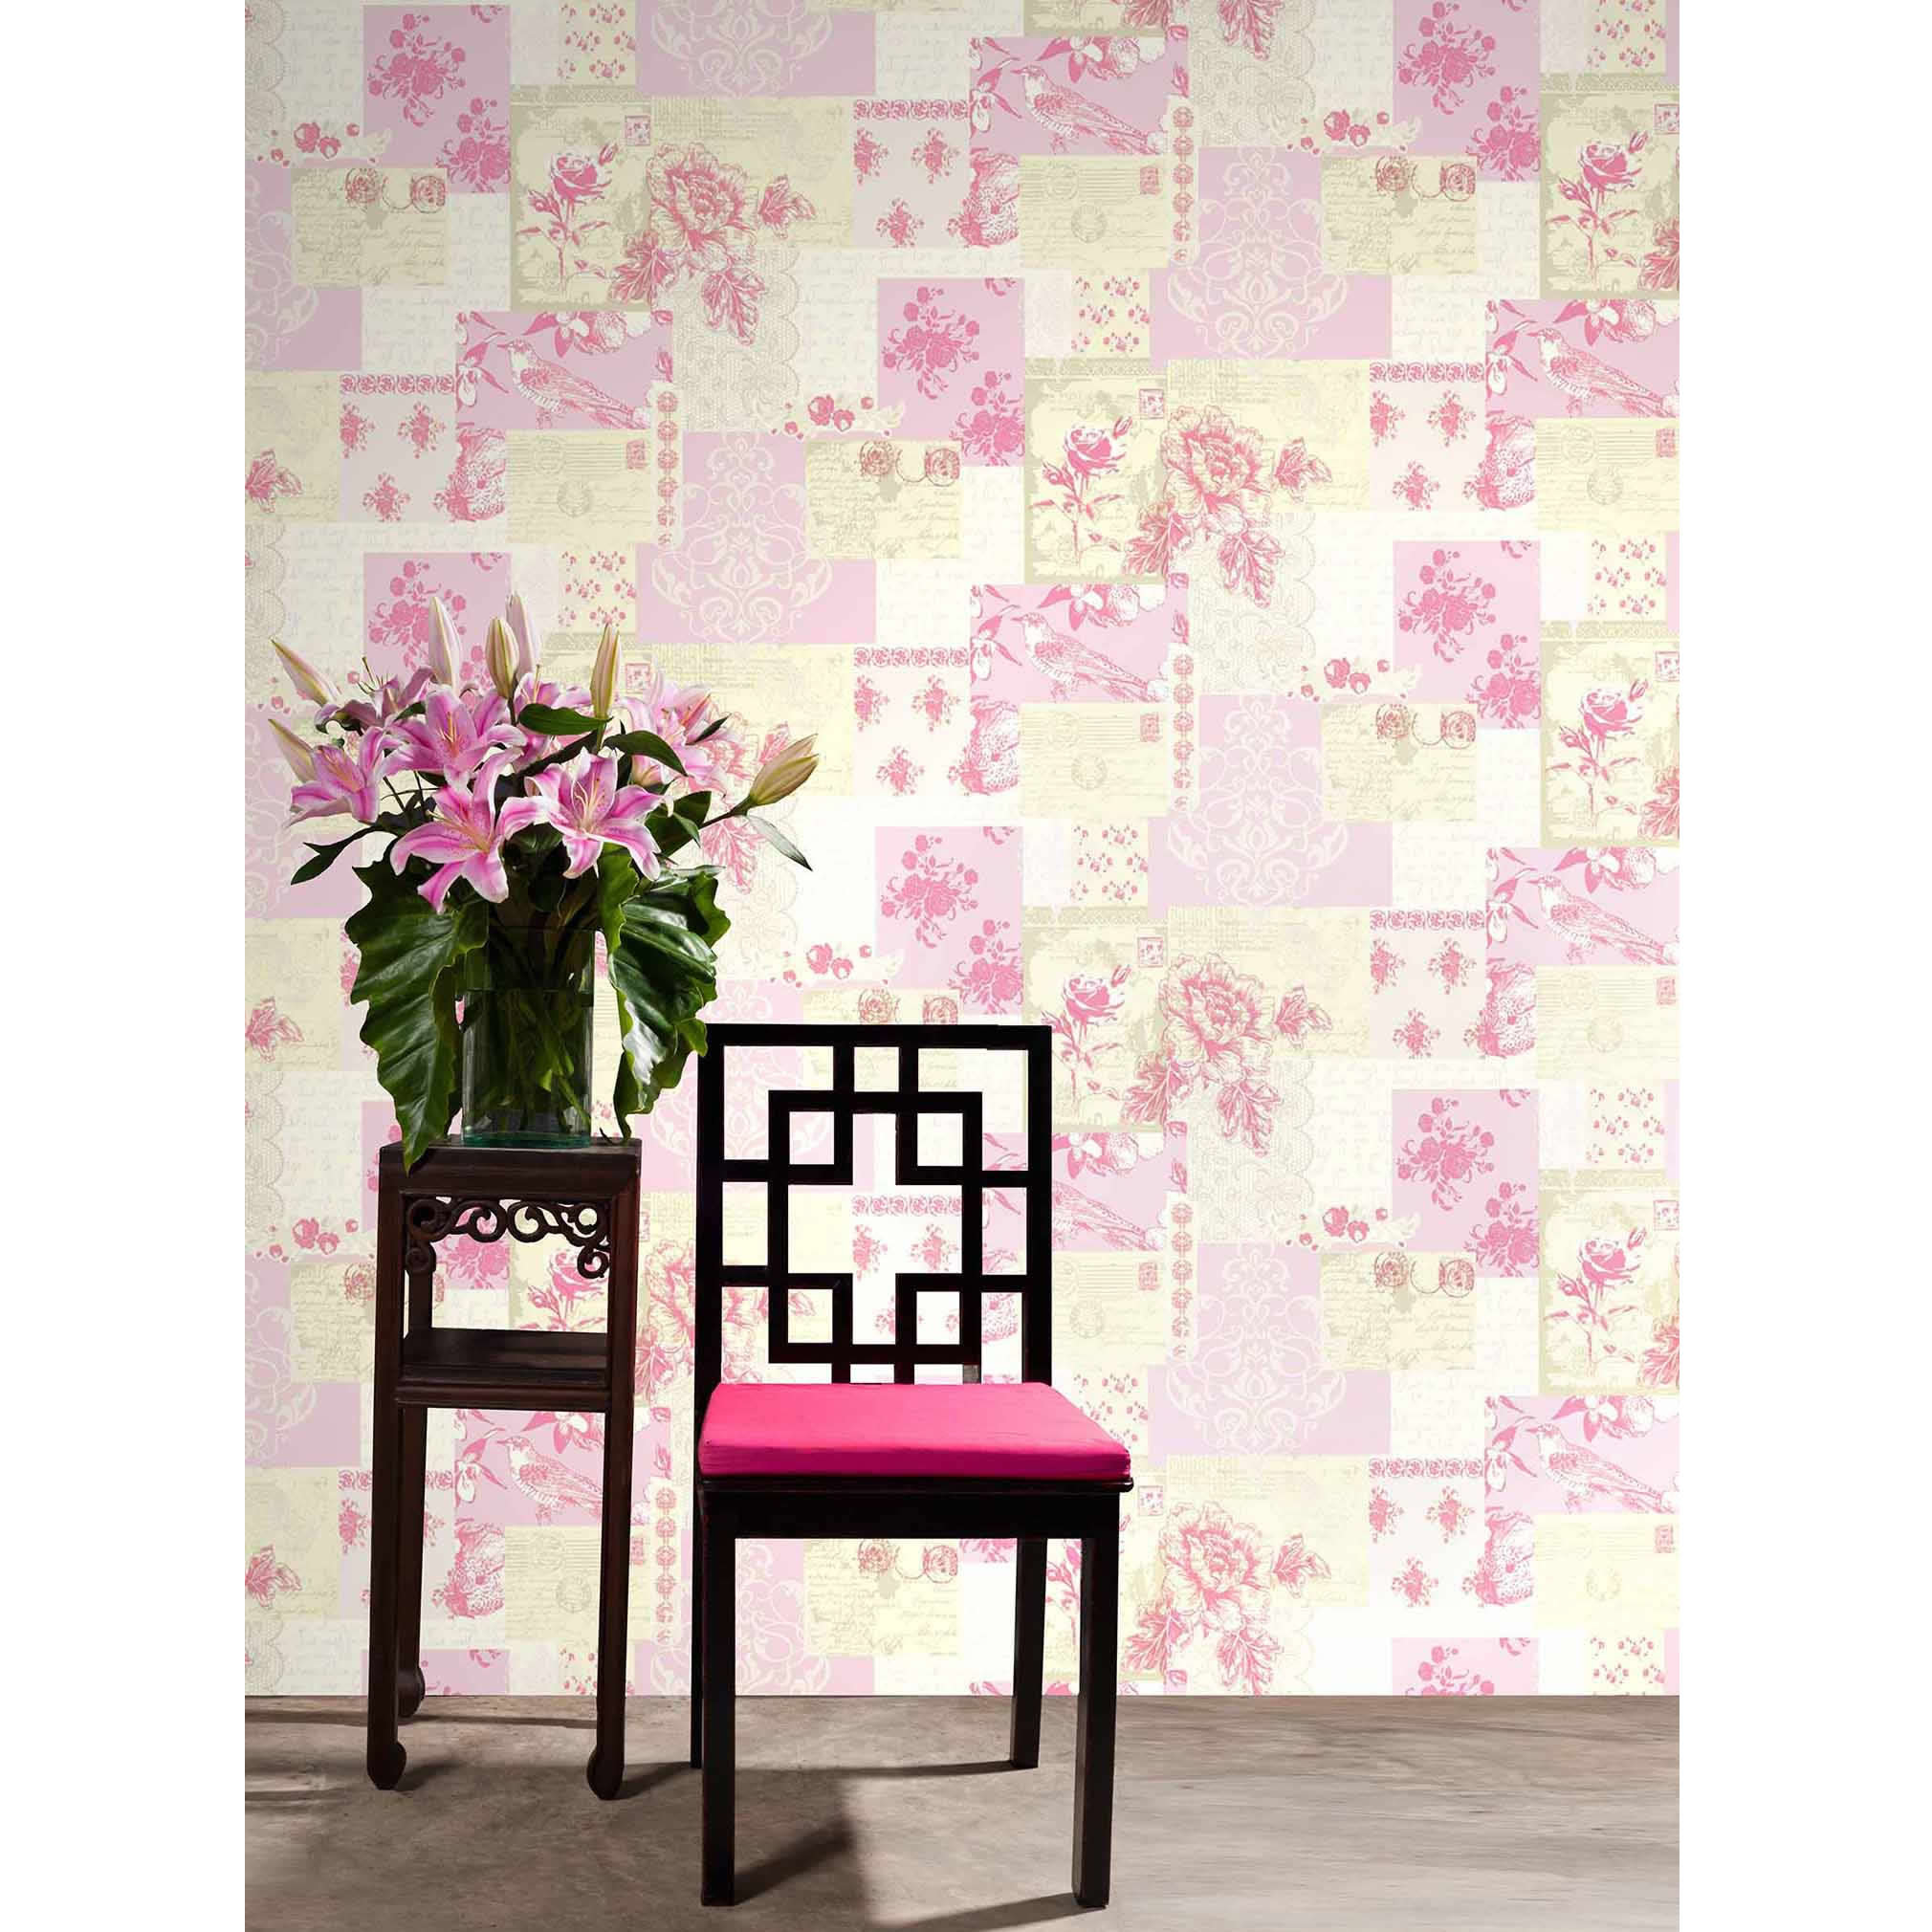 2020x2020 Coloroll Love Letters Old Rose Wallpaper 10m Roll – Next Day .